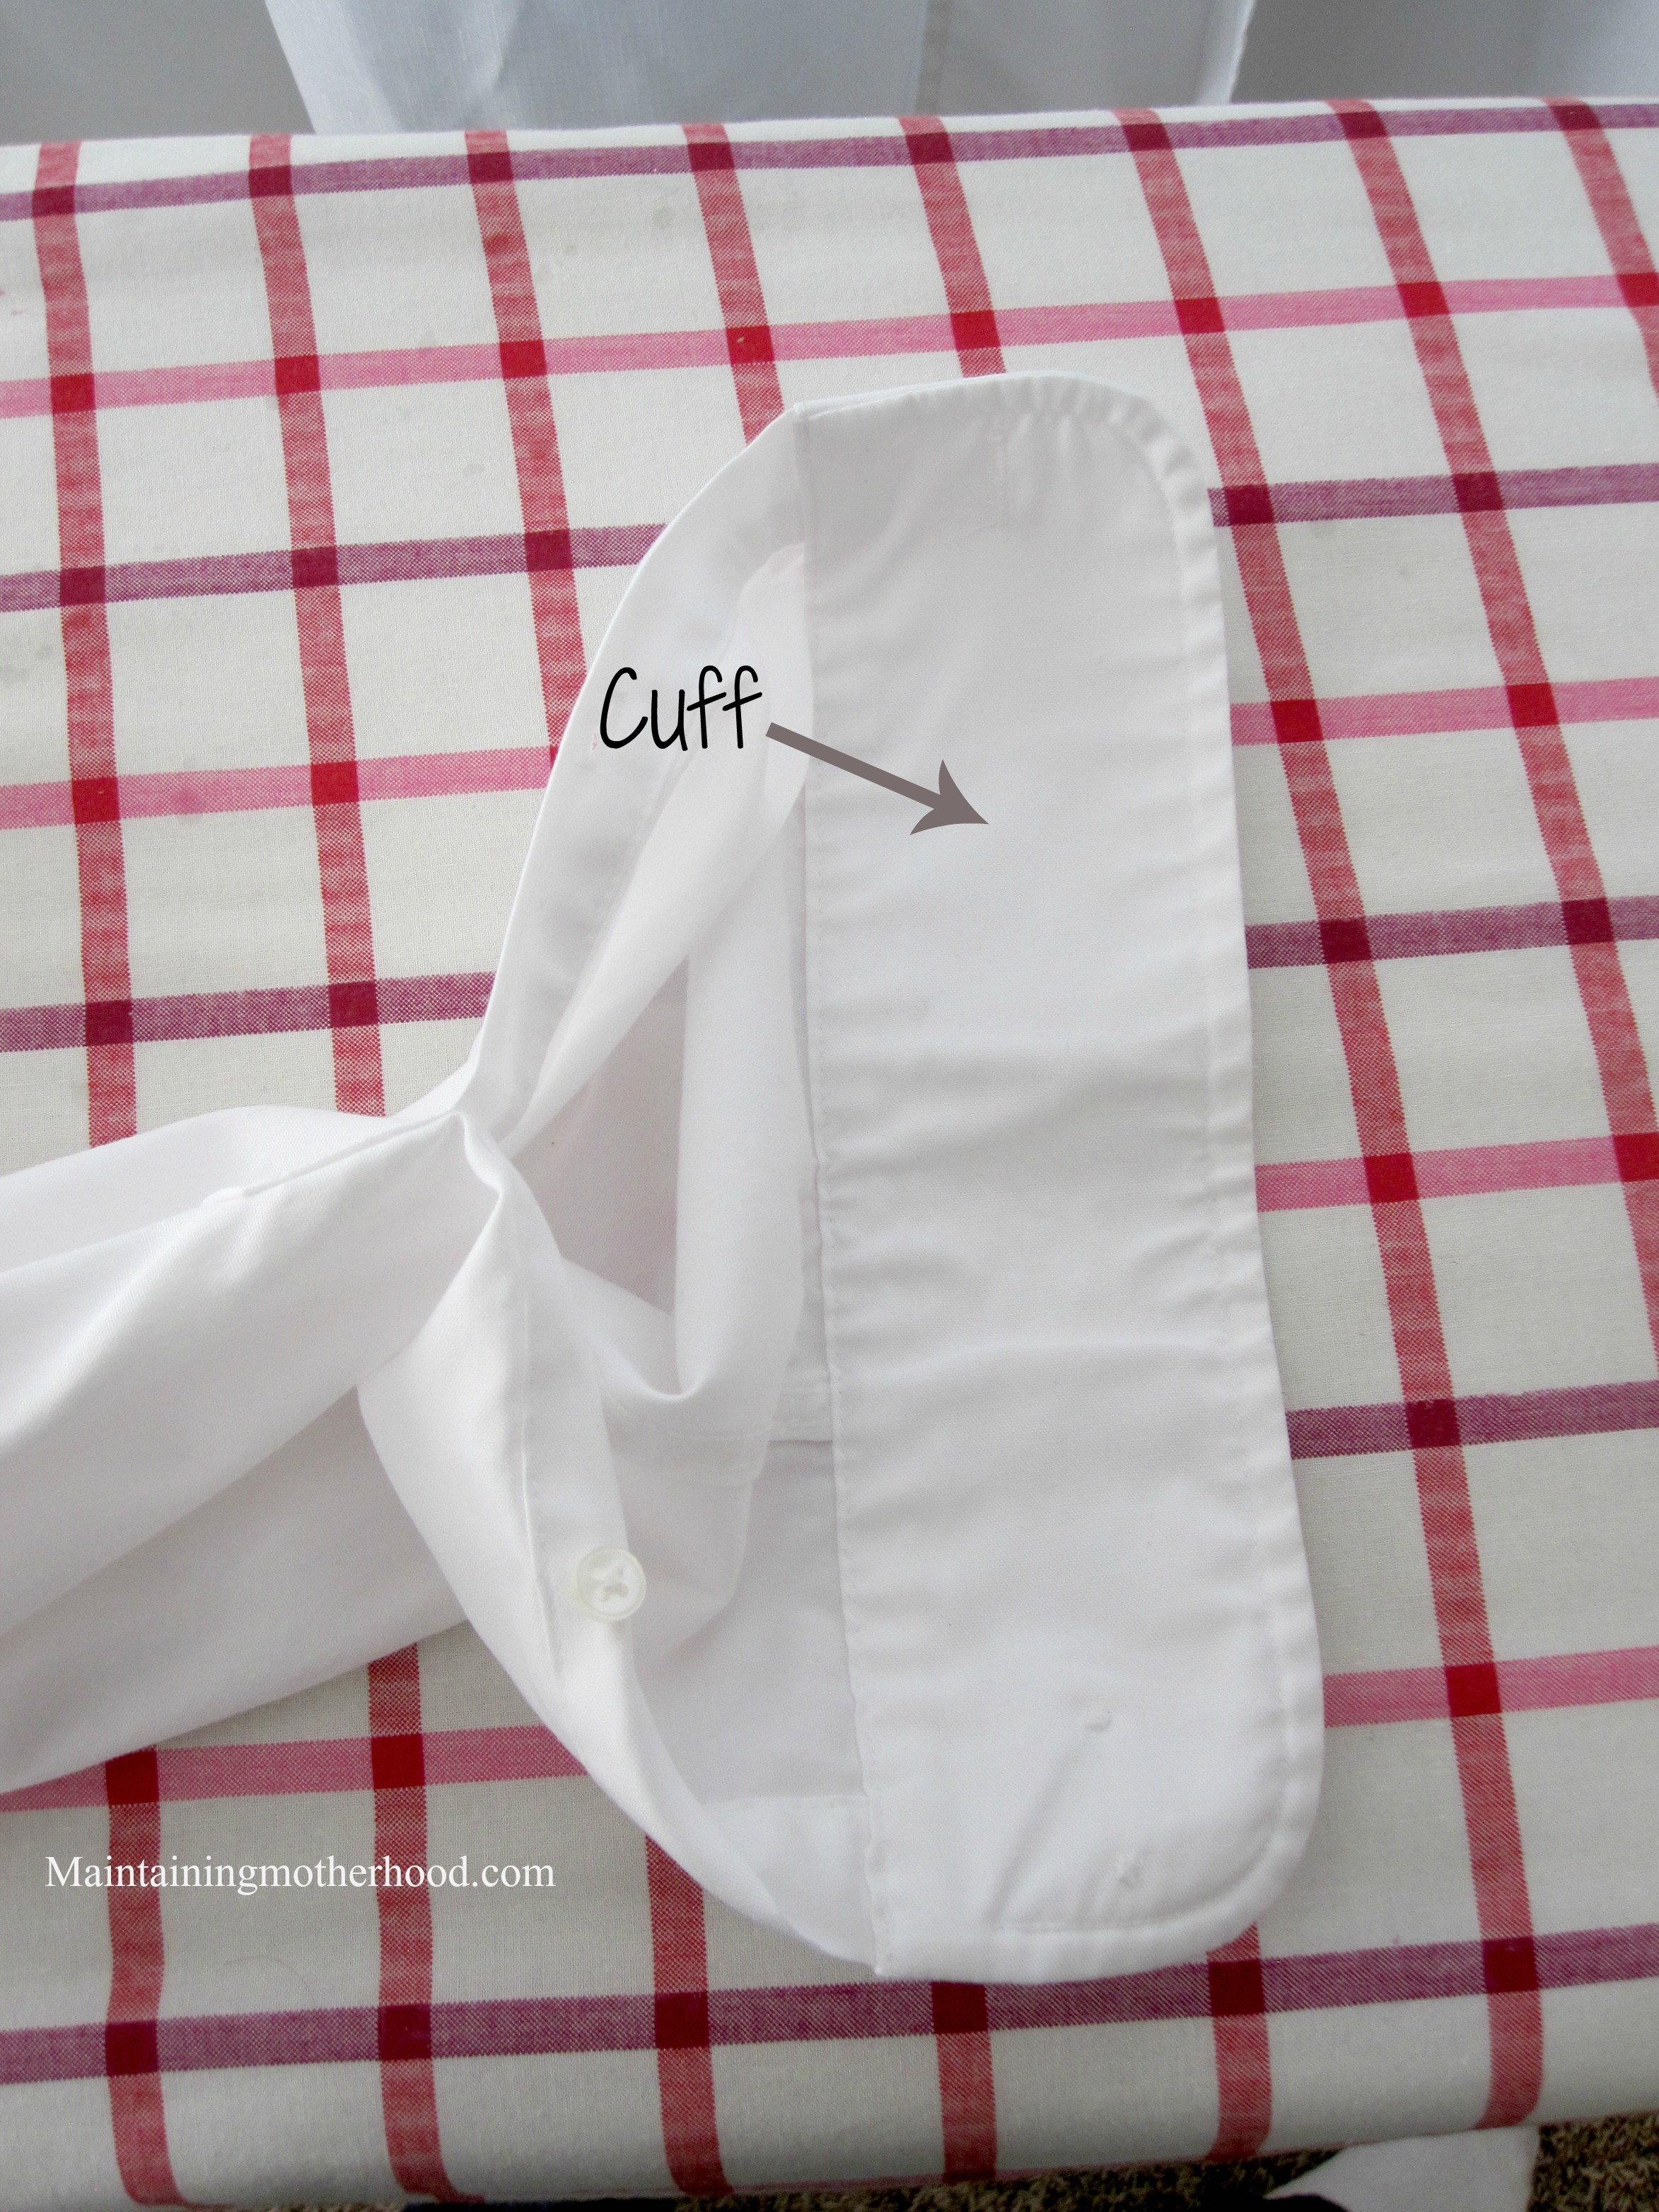 Want to save some major money? Follow these simple steps to learn how to Iron a Dress Shirt Like a Professional and save big bucks in Dry Cleaning fees!